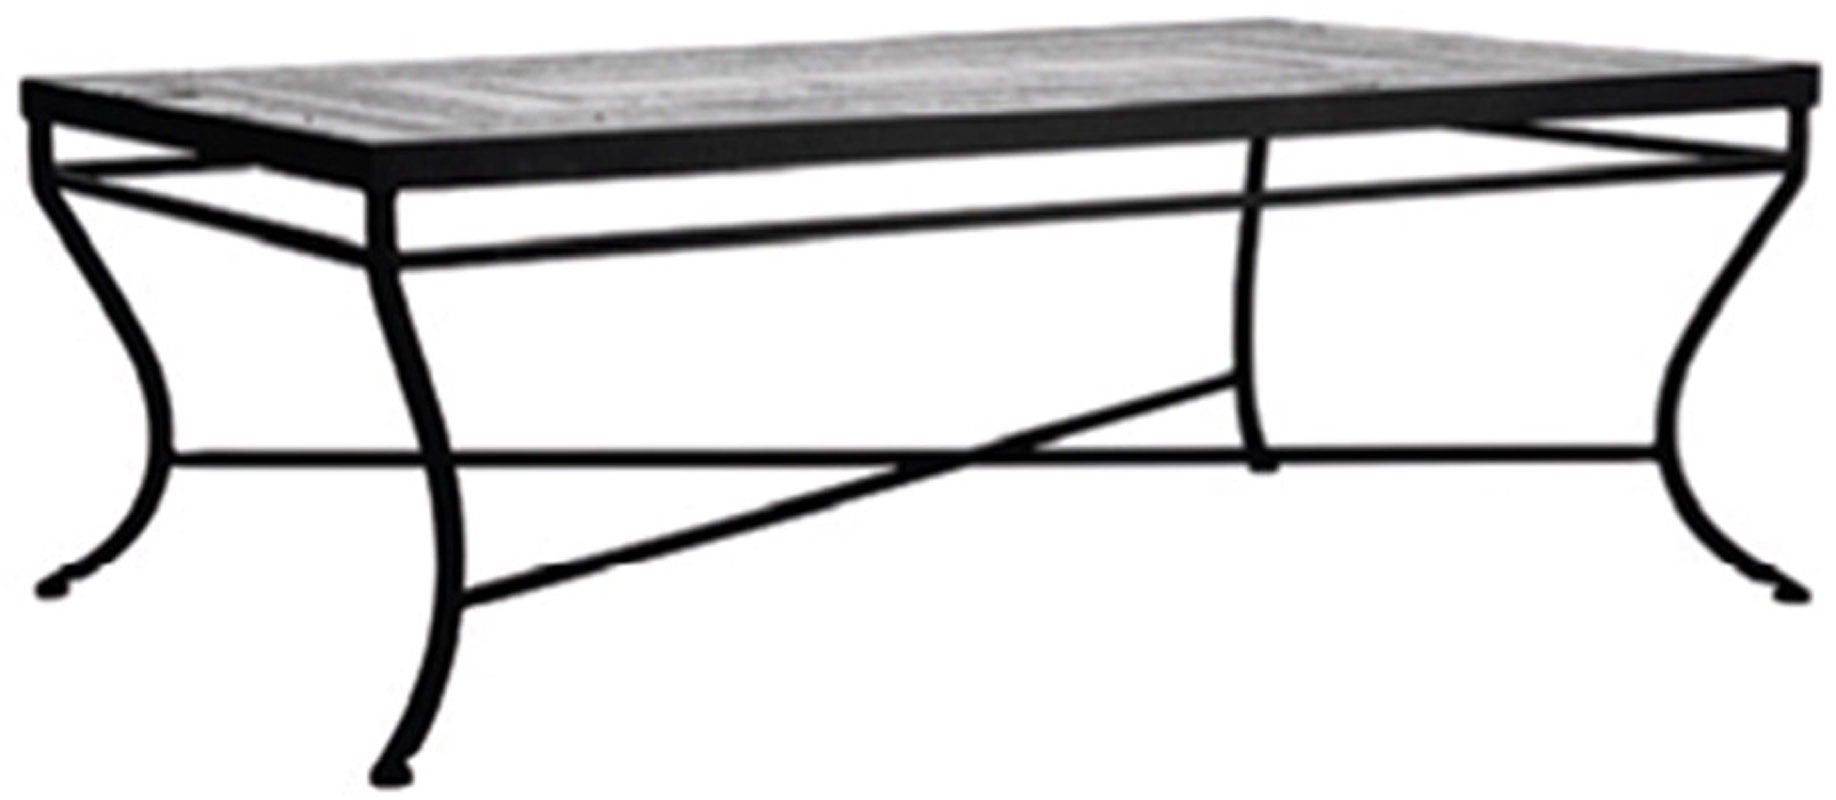 48" Iron Classic Rectangle Bistro Table Base